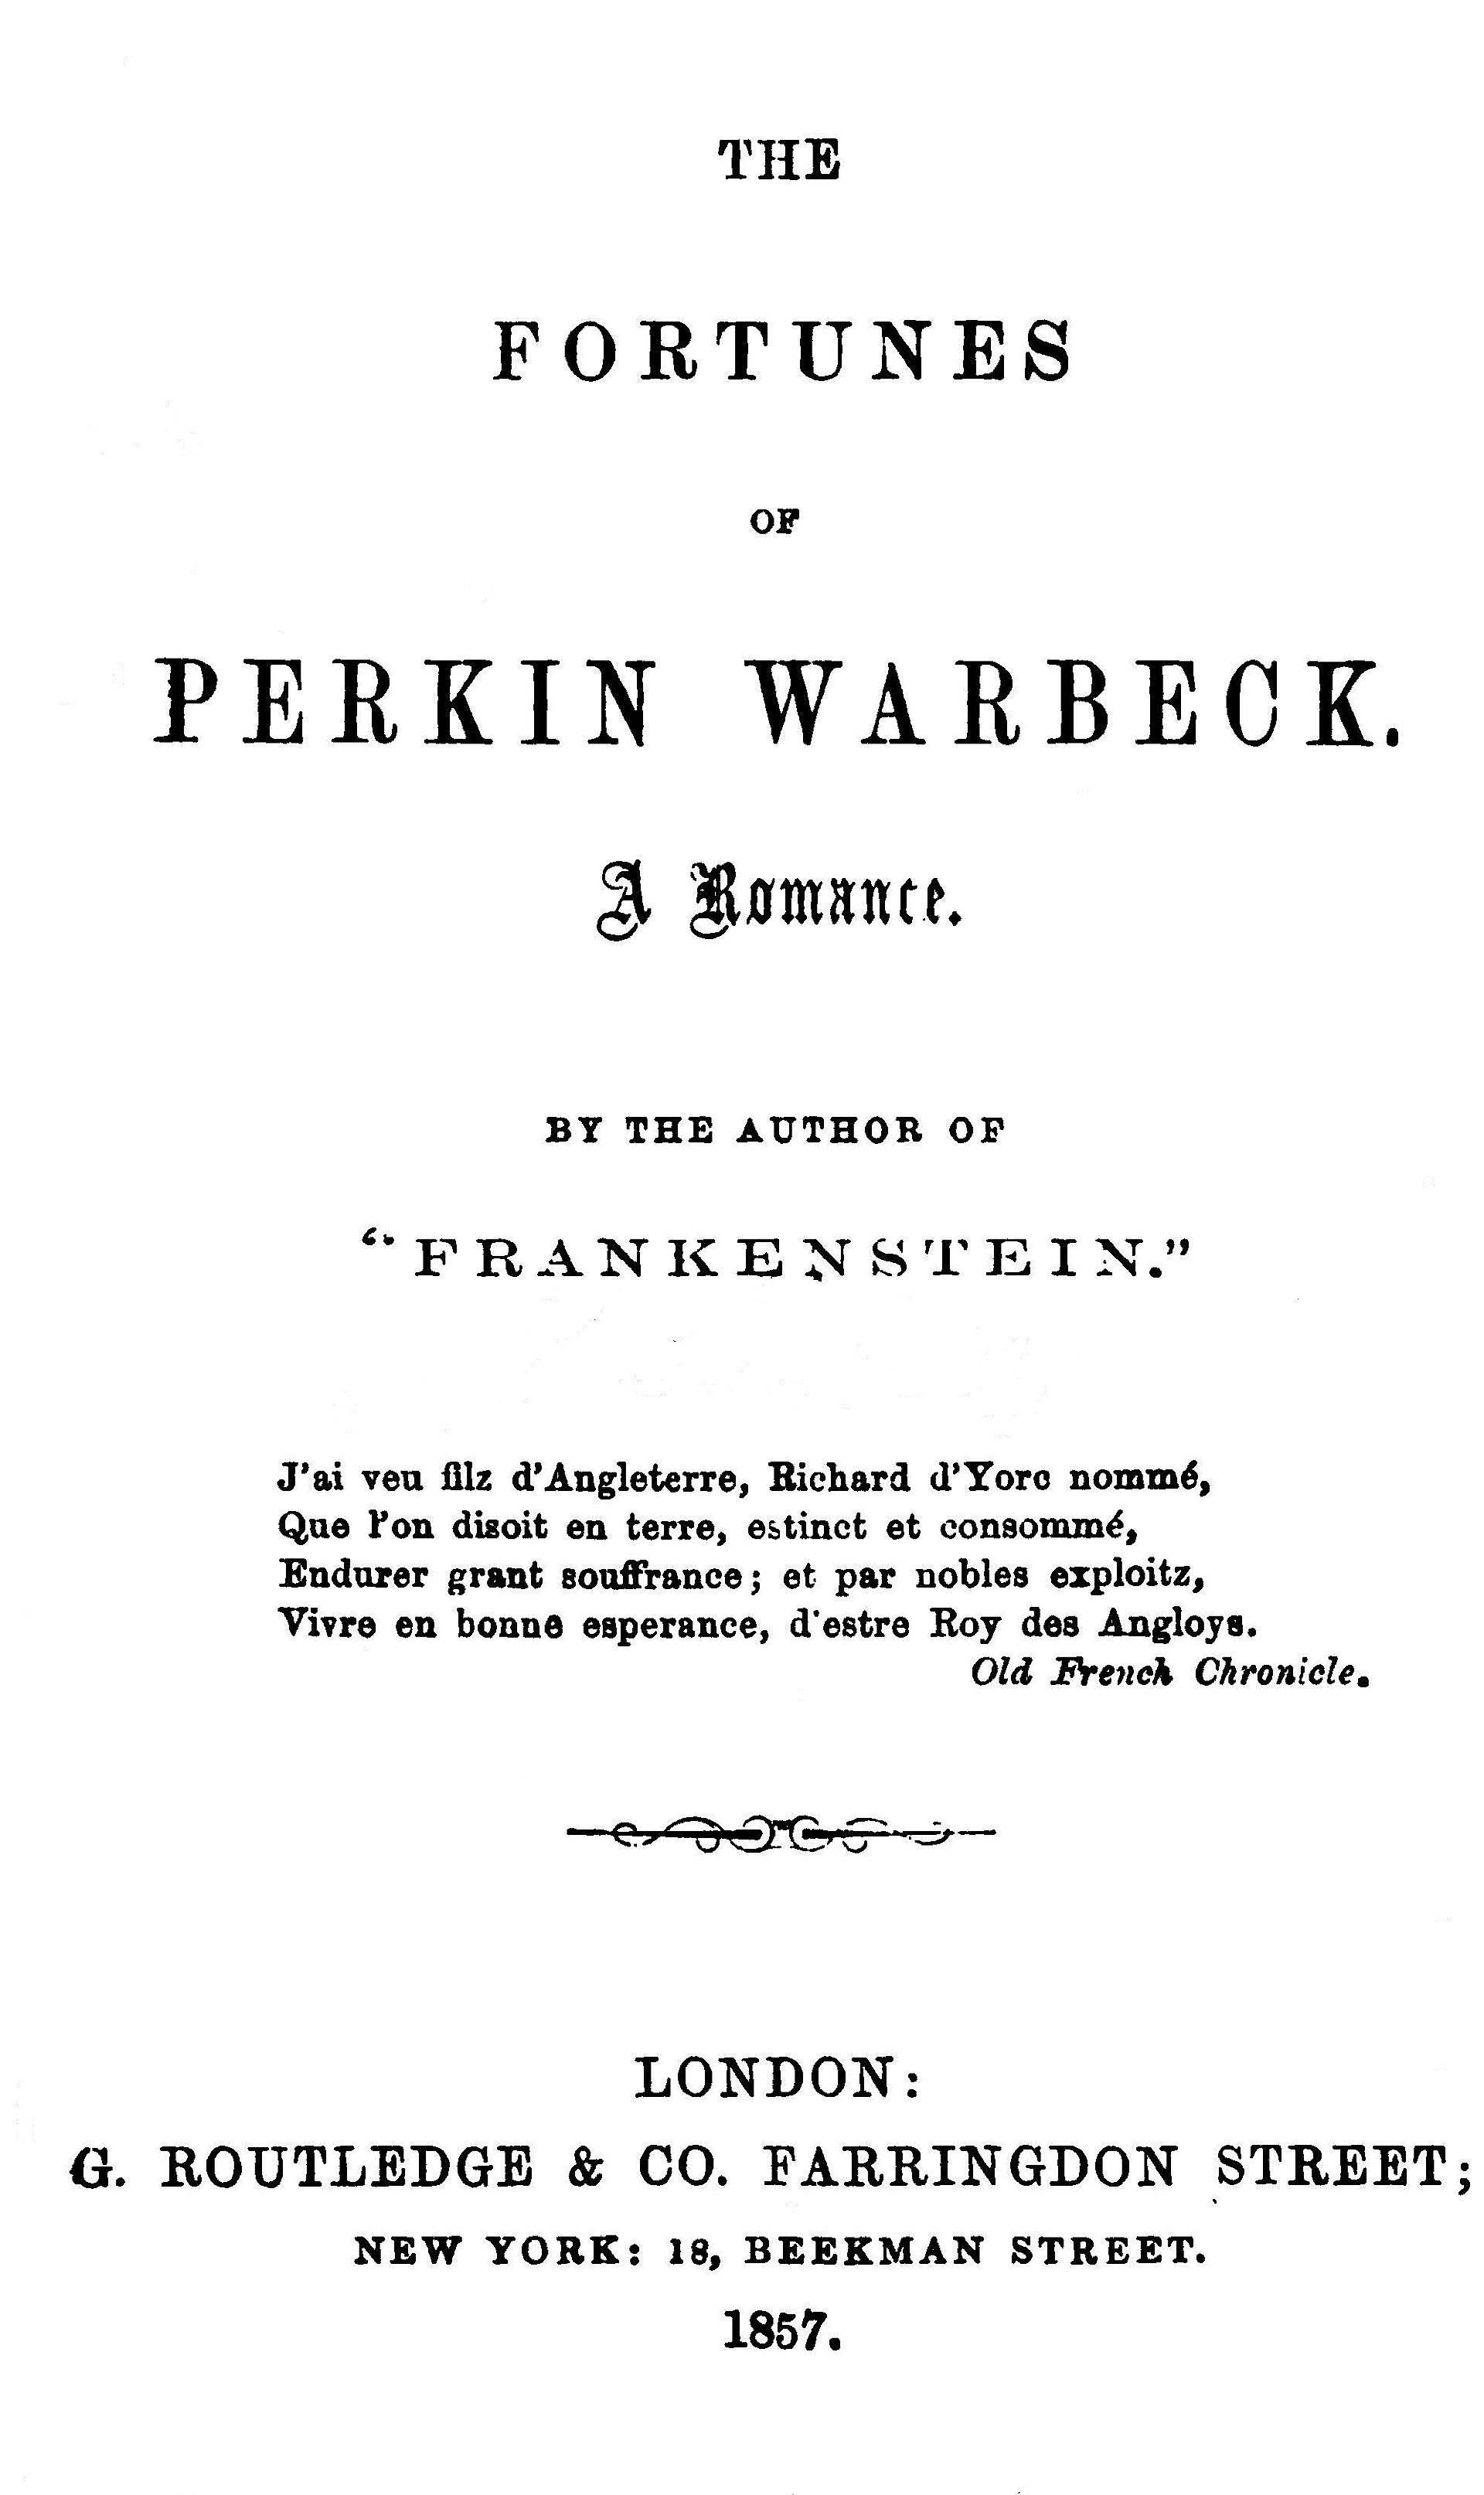 The Project Gutenberg eBook of The Fortunes of Perkin Warbeck, by Mary  Wollstonecraft Shelley.